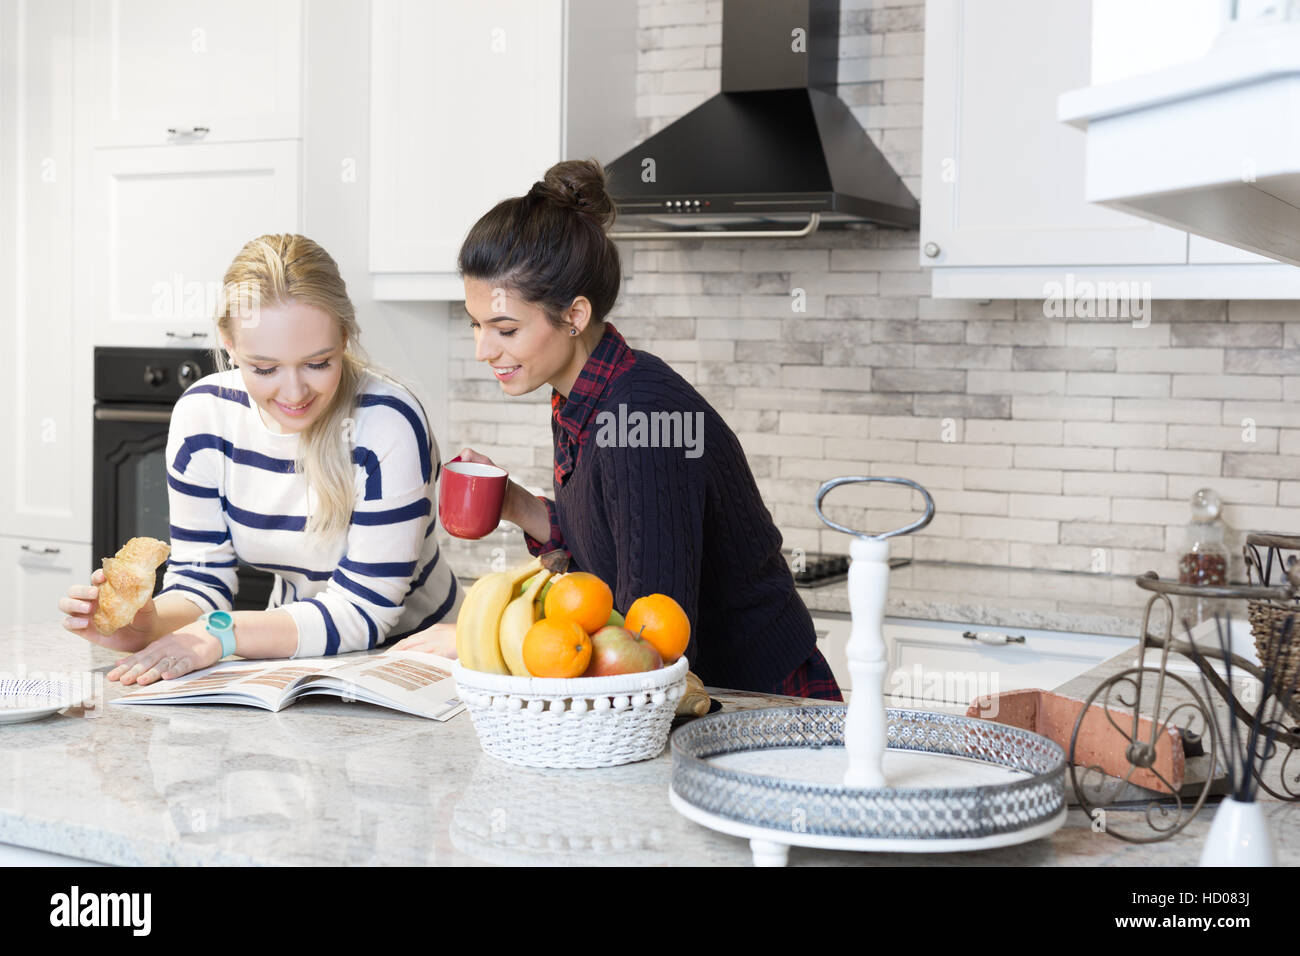 Two Girls Friends Preparing Breakfast And In A Kitchen Concept Cooking Culinary Healthy Lifestyle Stock Photo Alamy